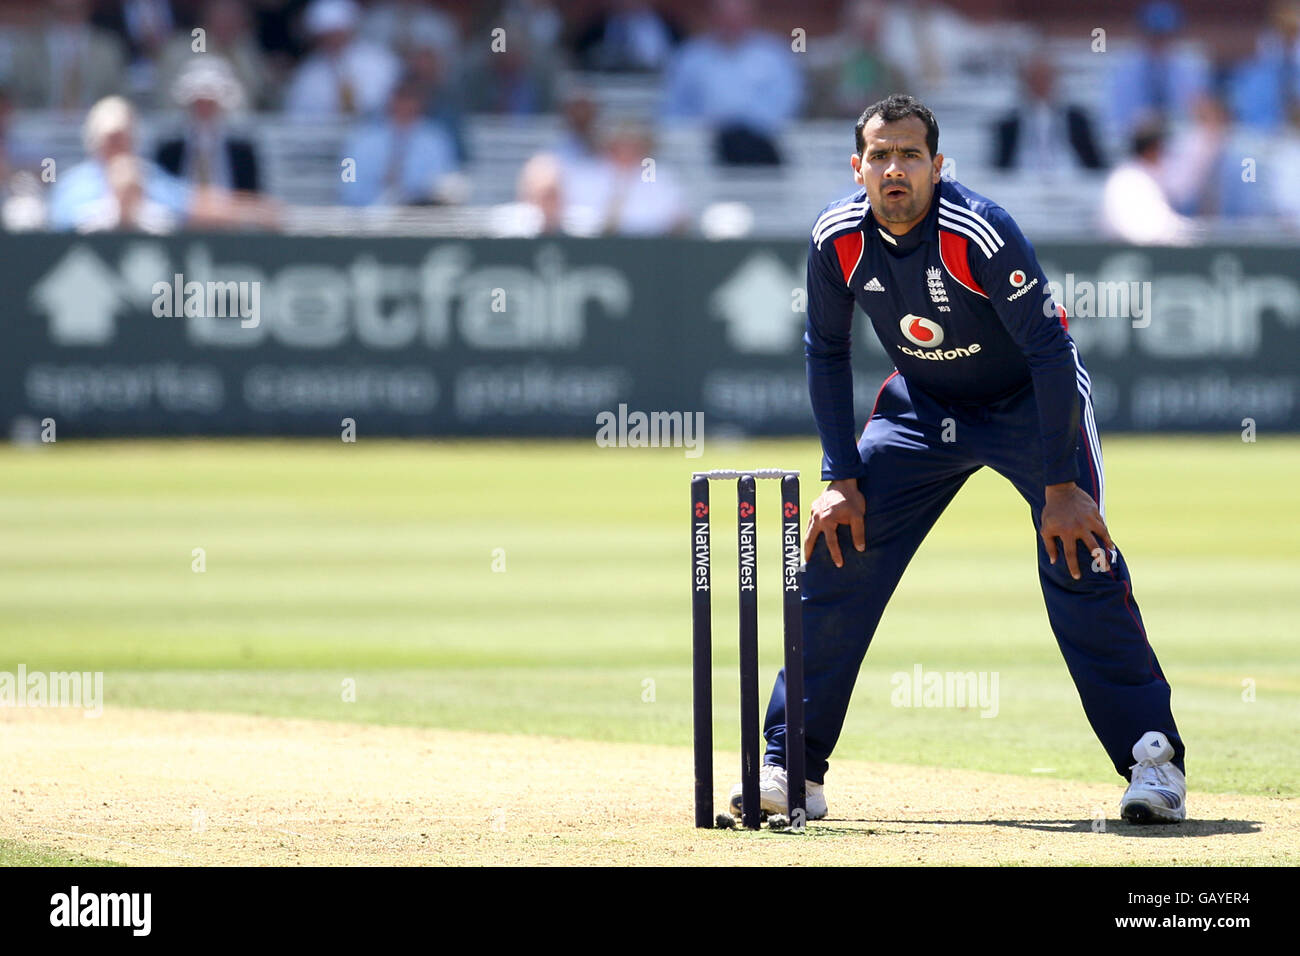 Cricket - NatWest Series - Fifth One Day International - England v New Zealand - Lord's Stock Photo